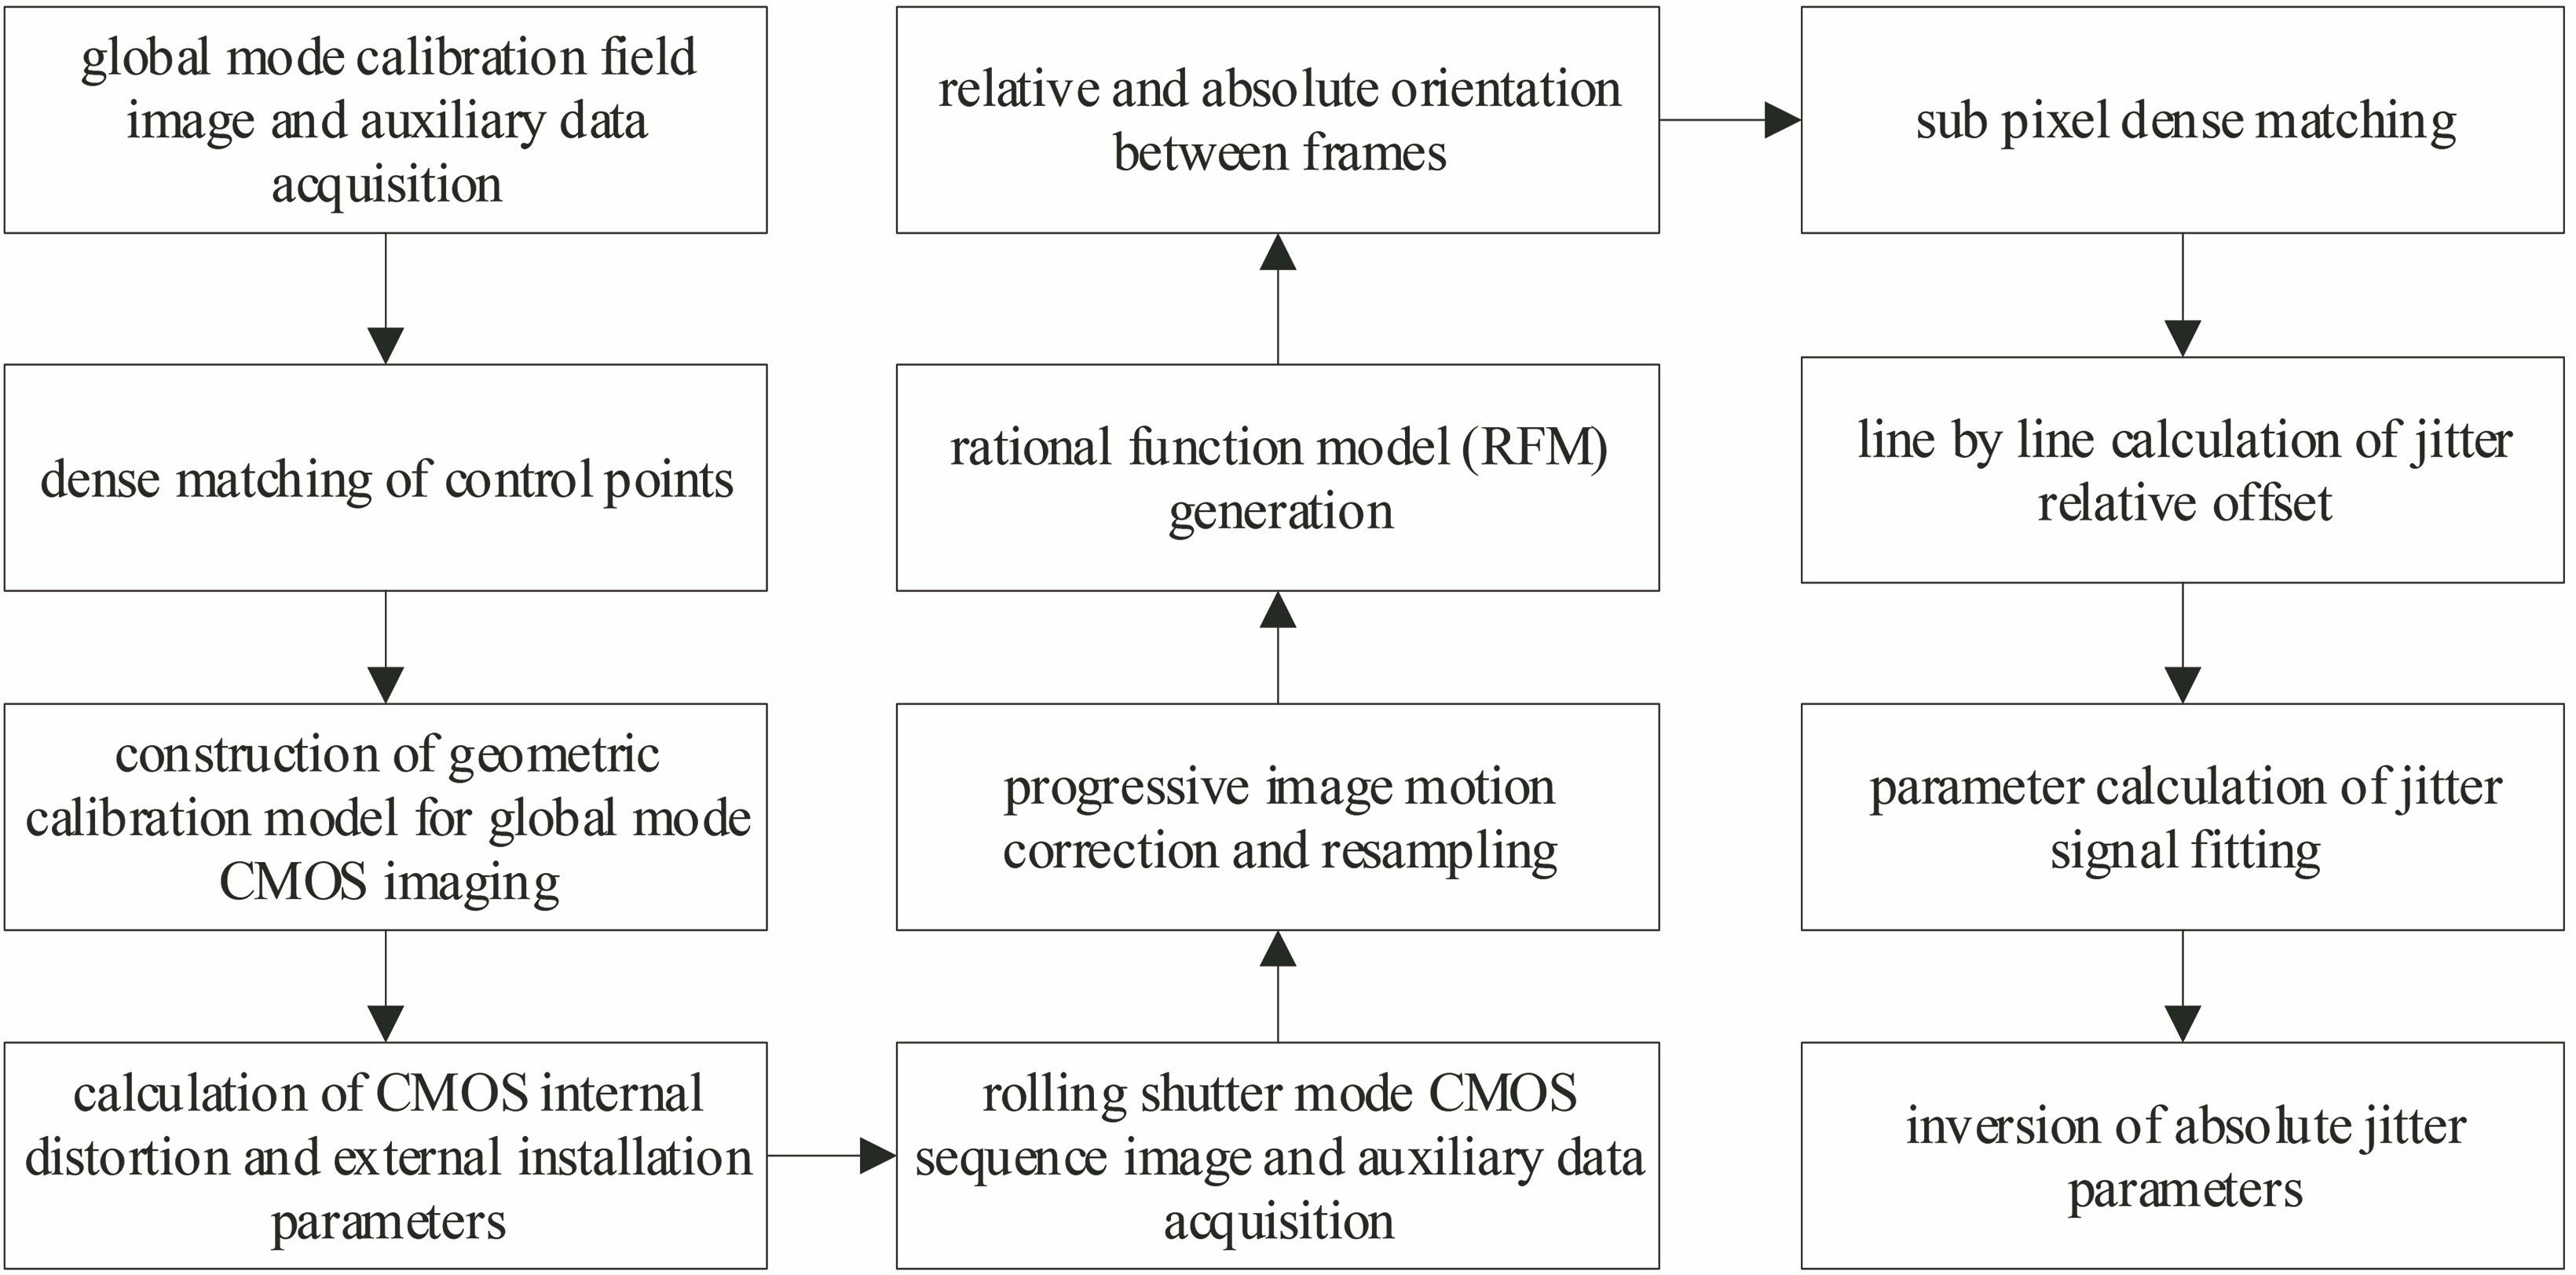 Jitter detection flow chart for space camera based on rolling shutter CMOS imaging